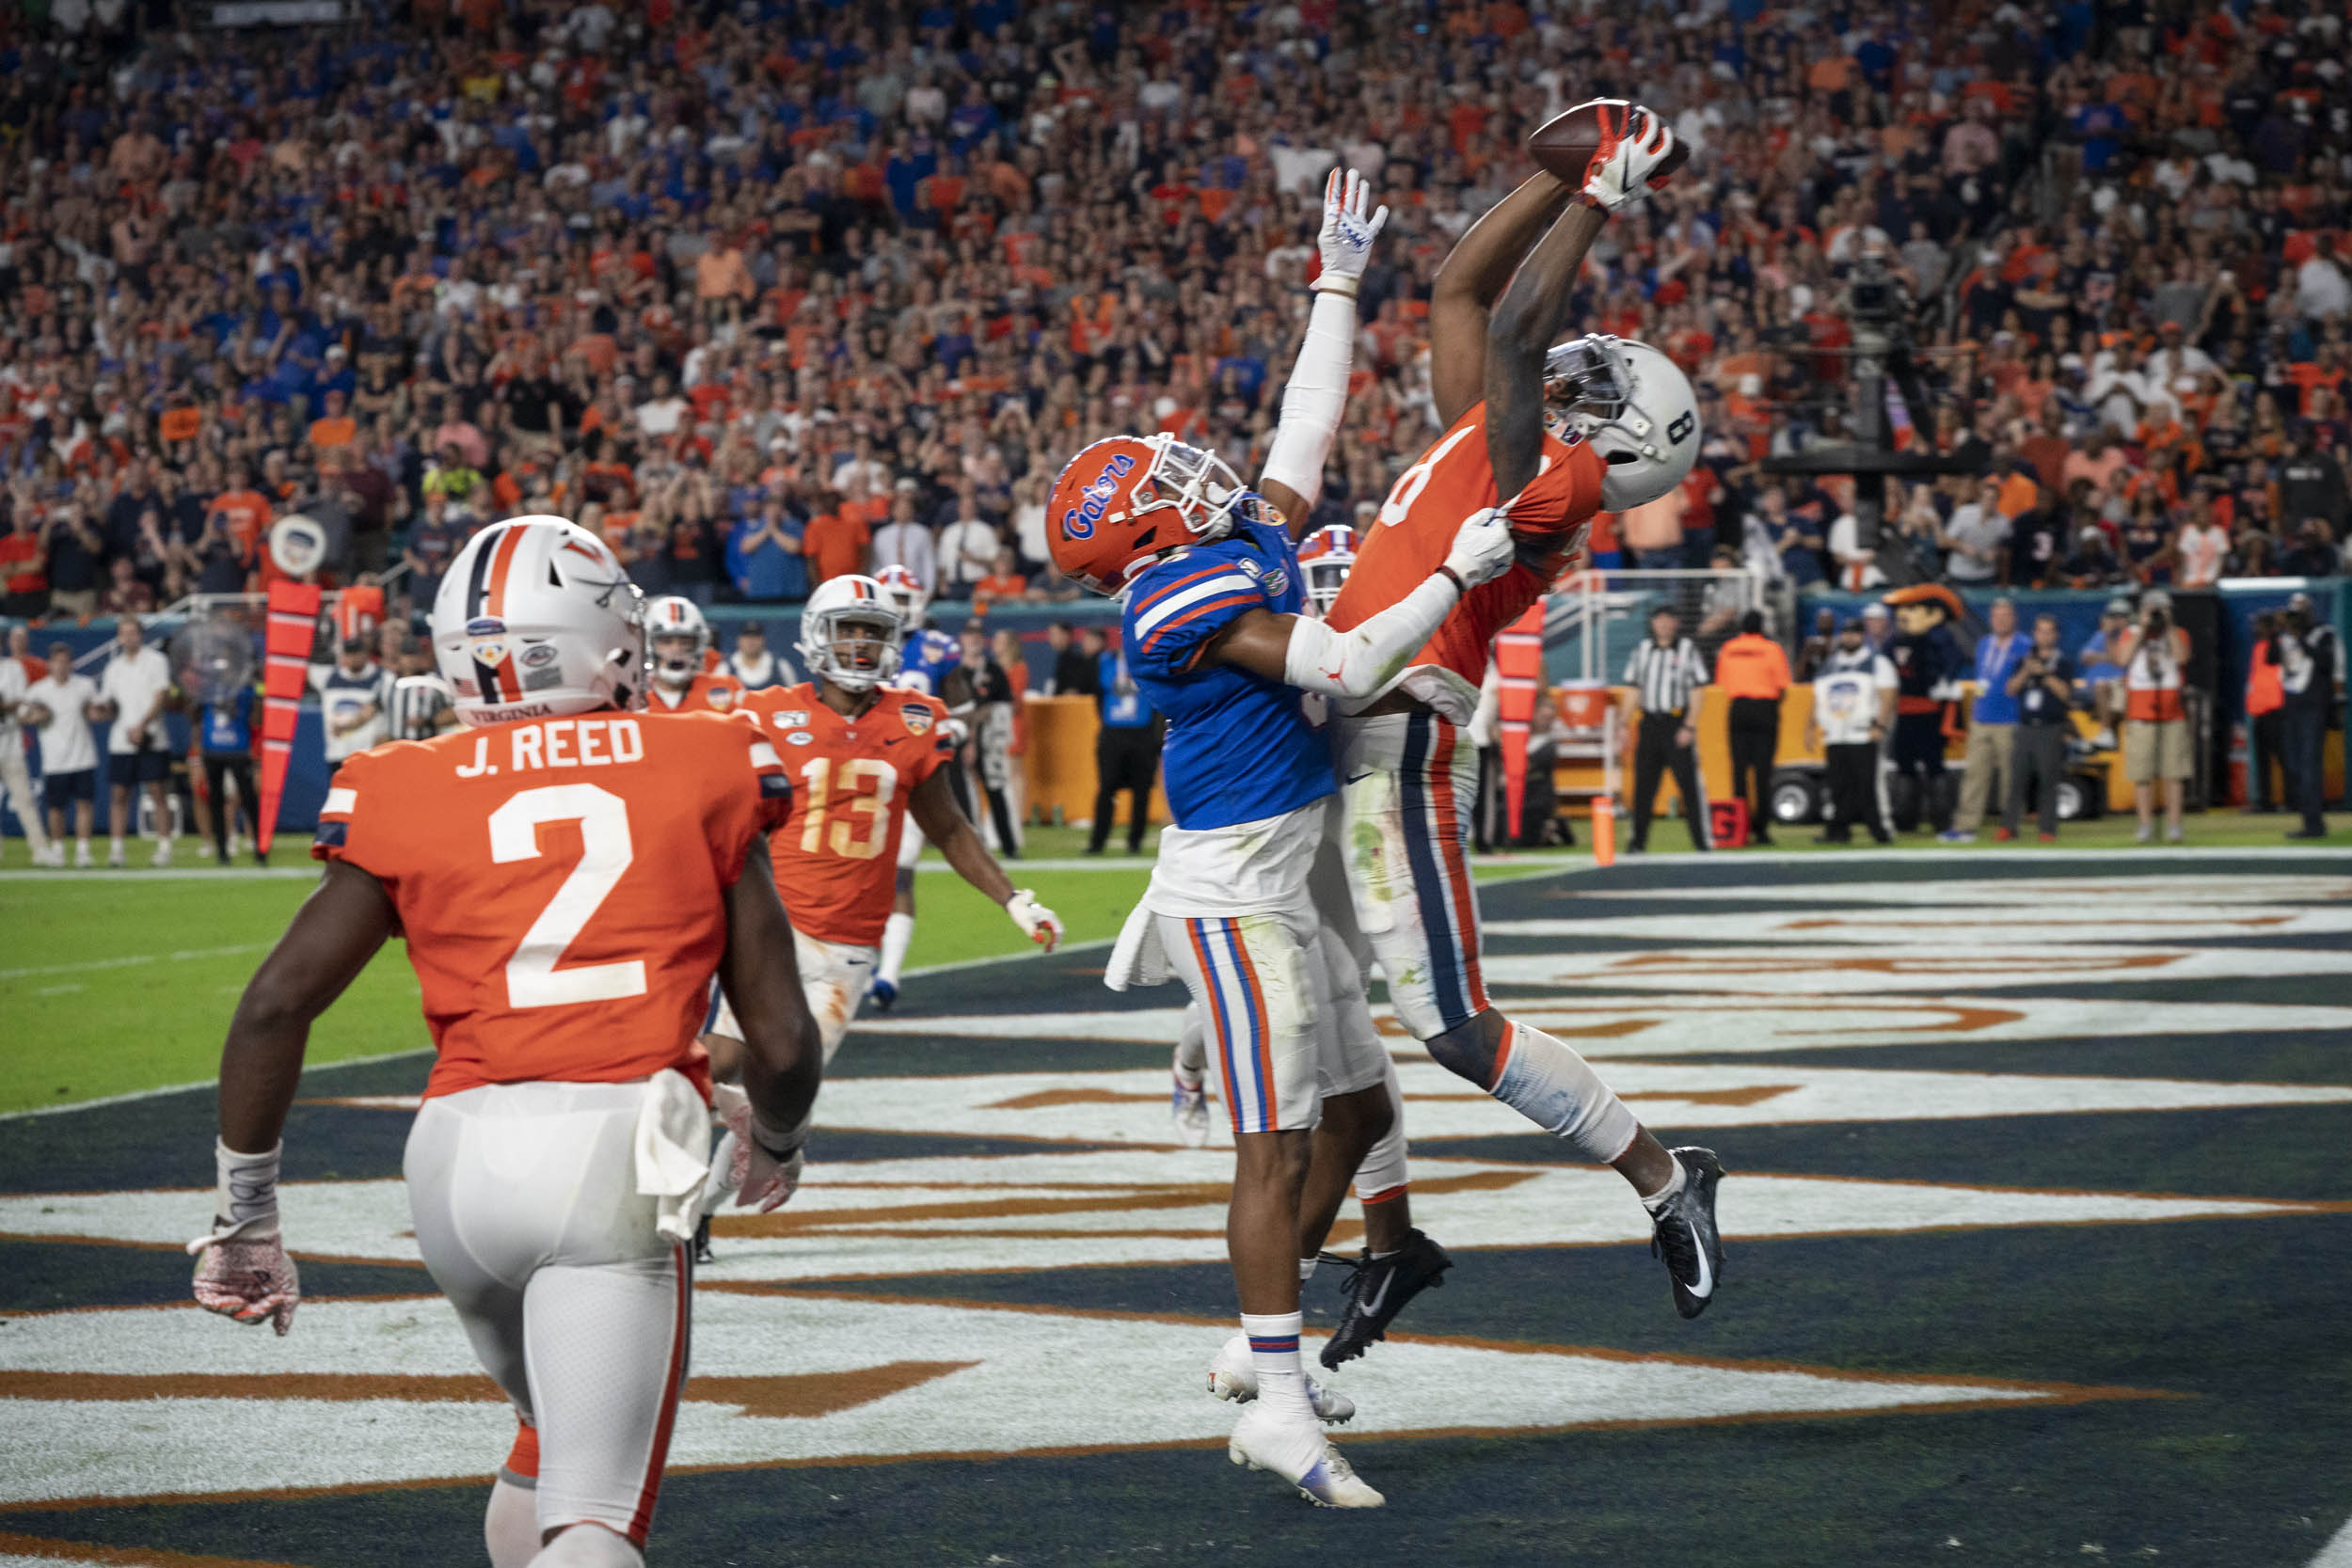 Hasise Dubois leaps to make a catch in the endzone with a Florida player grabbing him